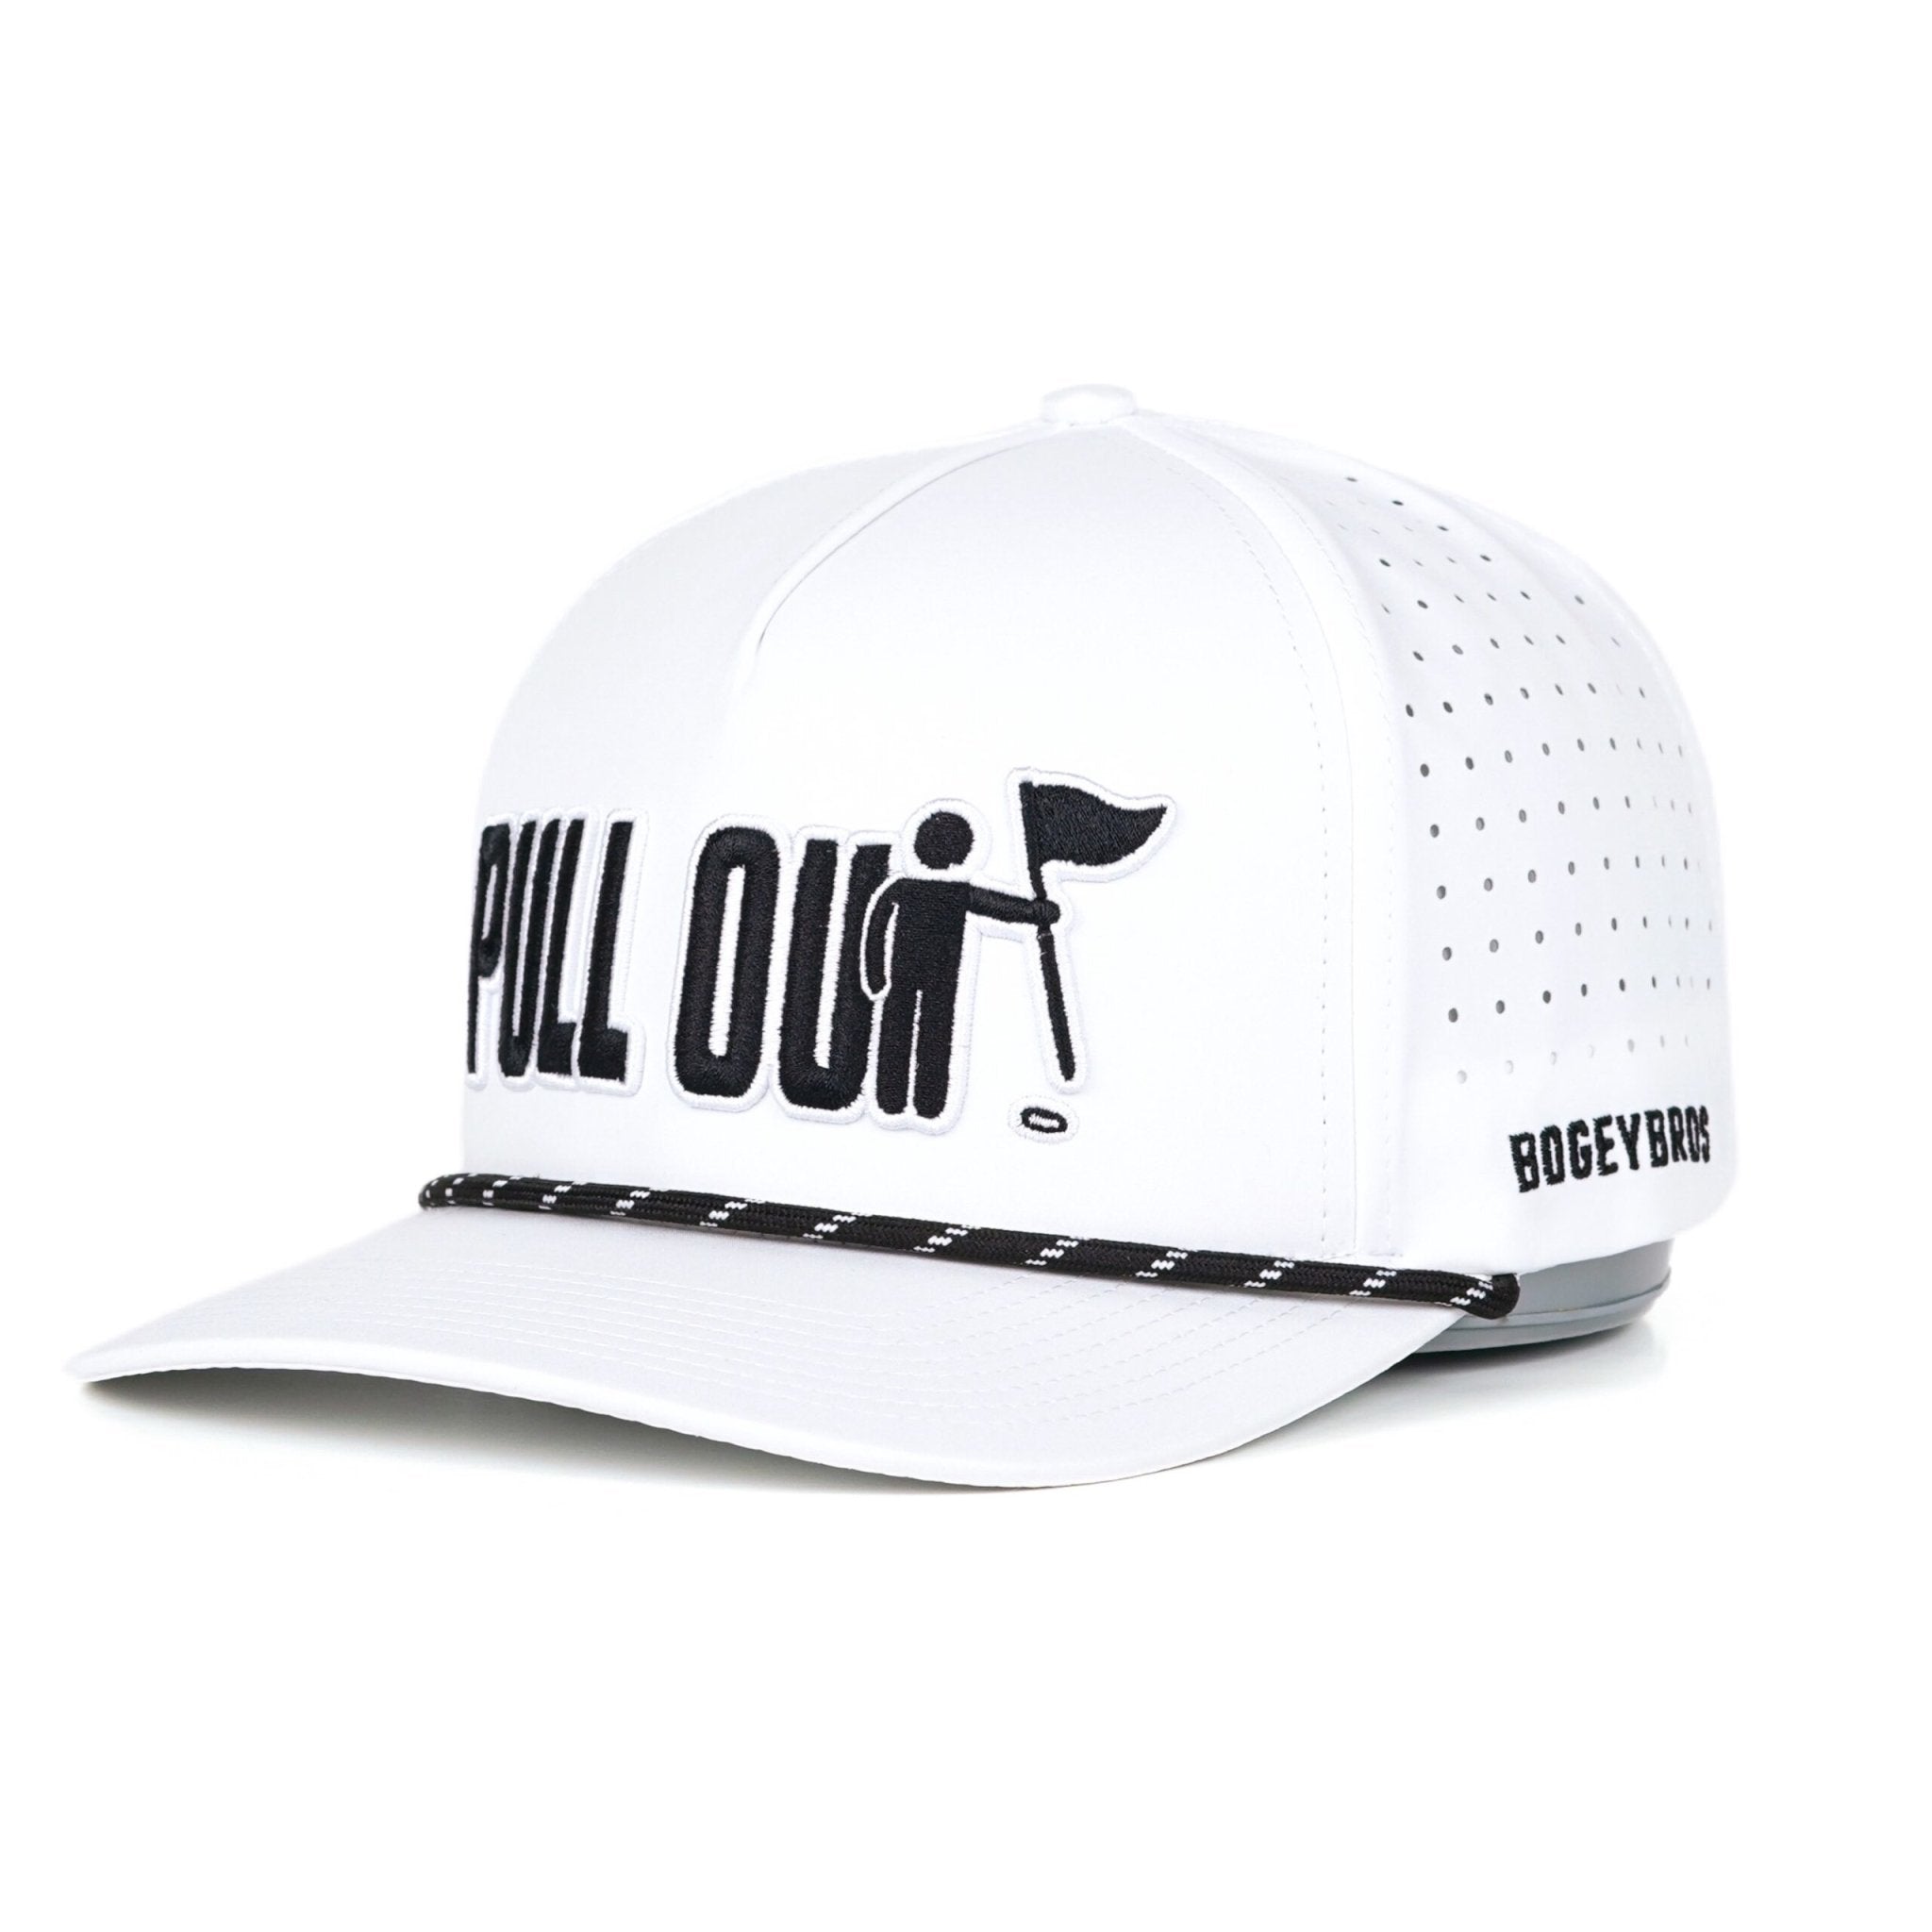 PULL OUT - Performance Golf Rope Hat - Snapback